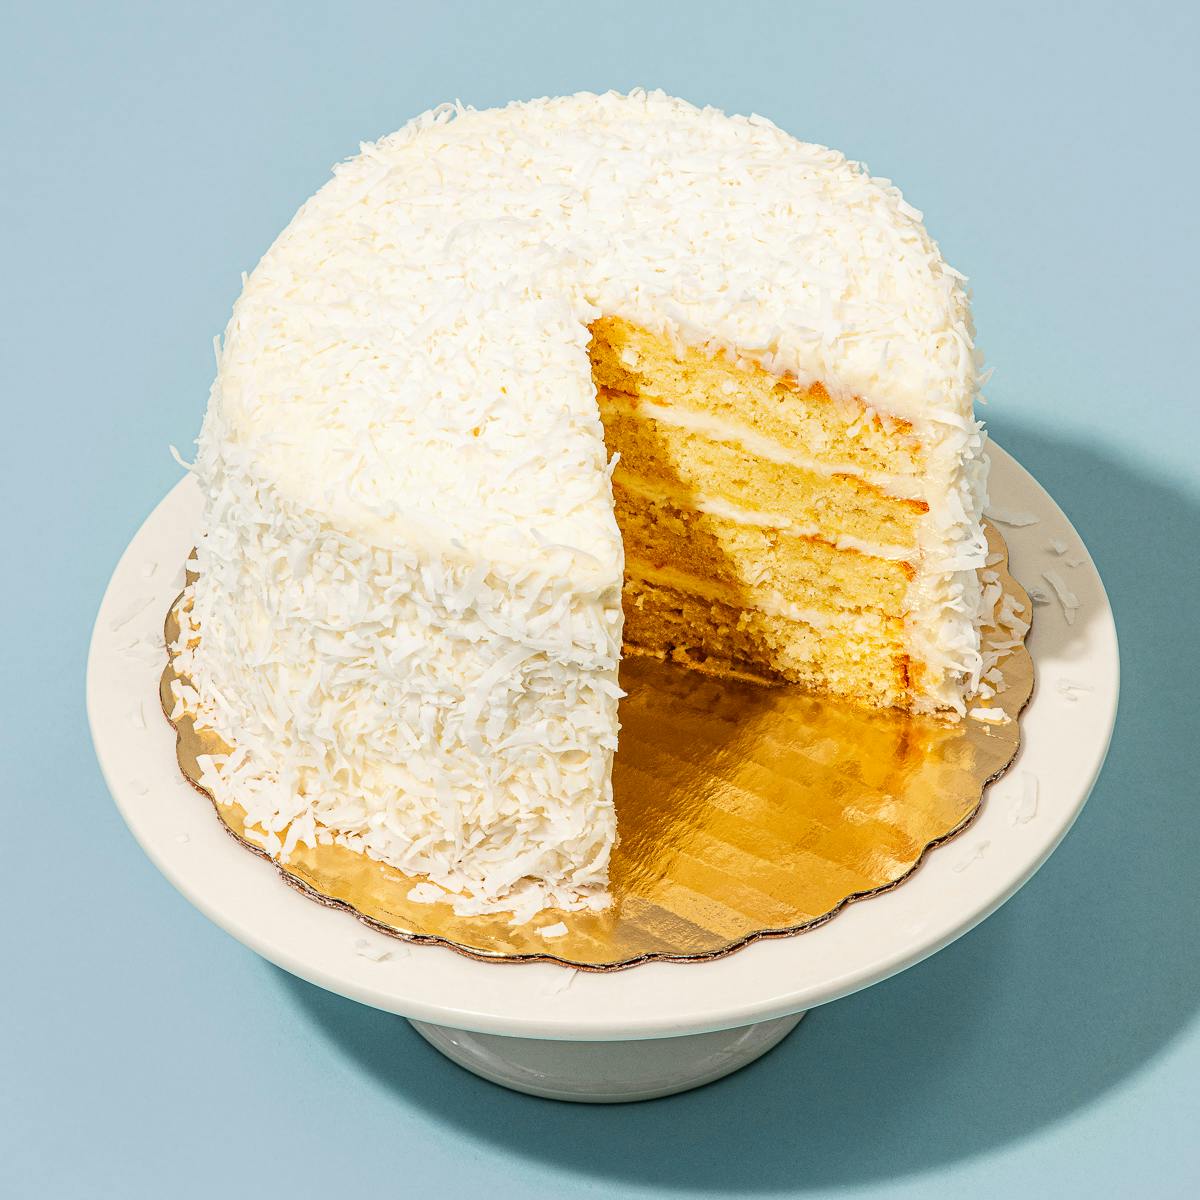 Southern Coconut Cake Recipe - Julias Simply Southern